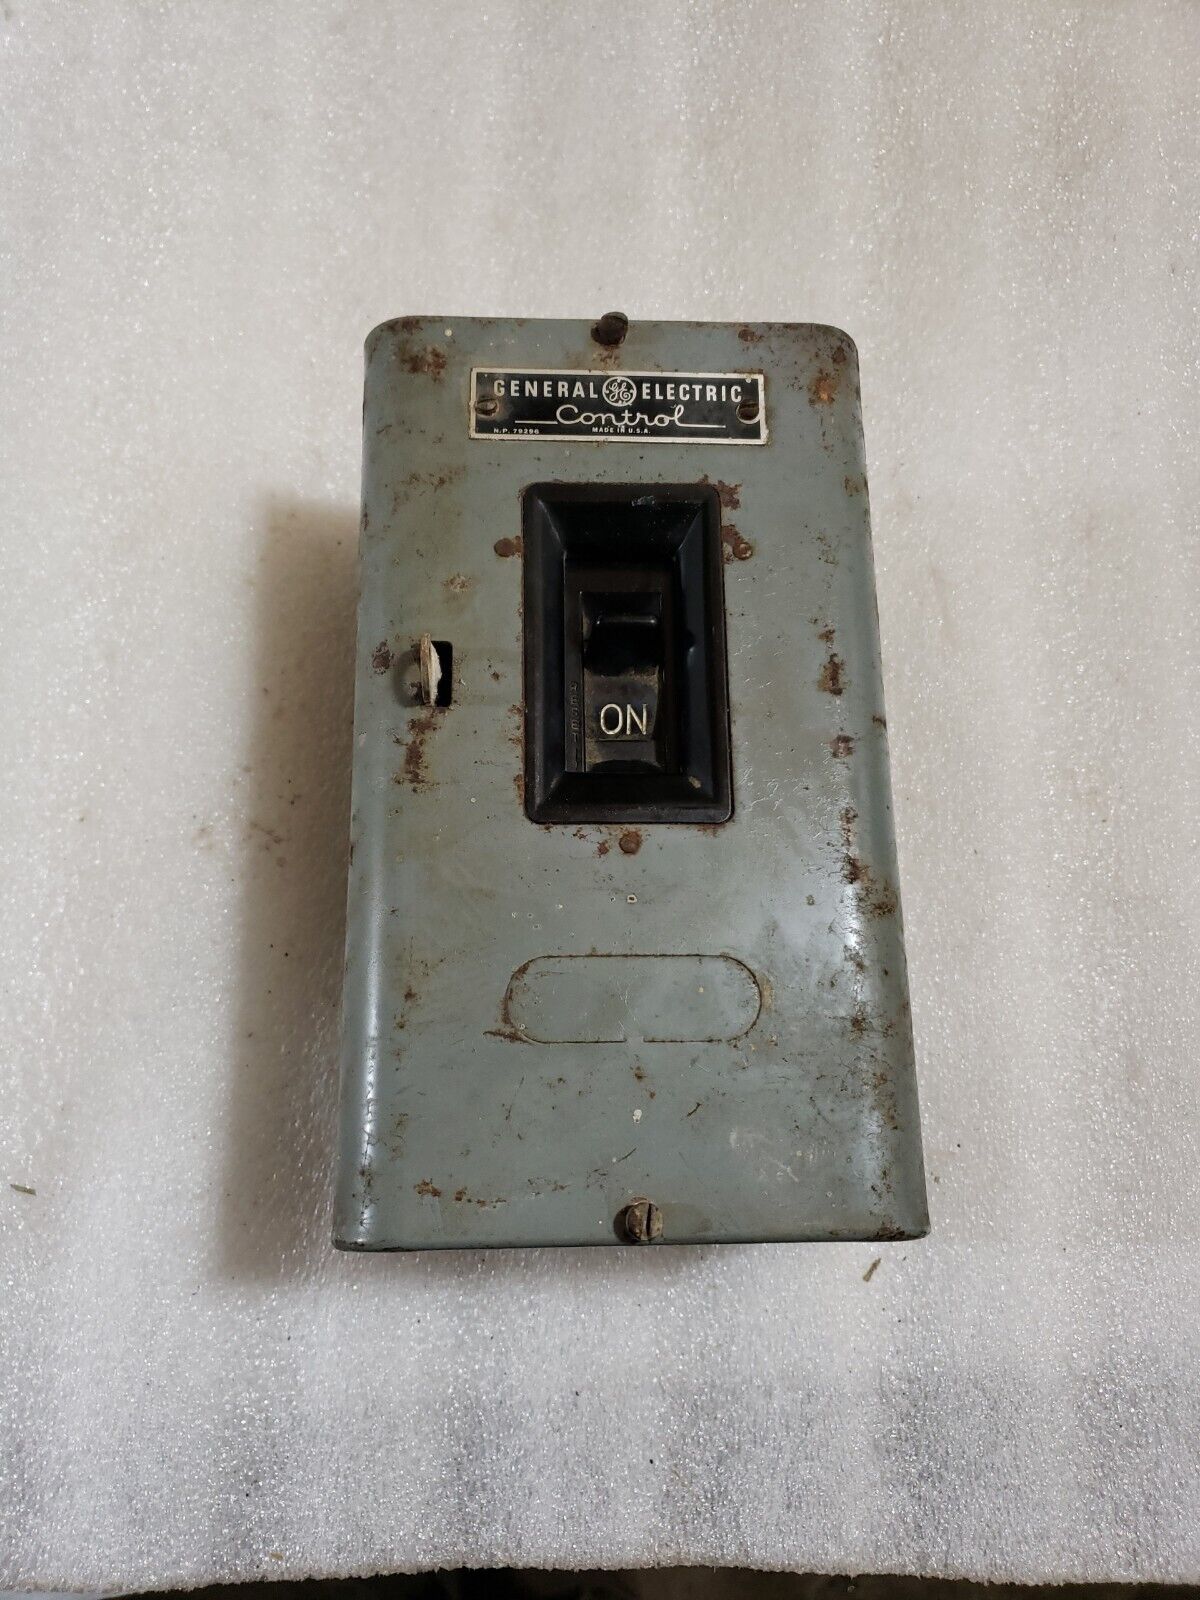 Switch On-OFF General Electric G/E GE  Motor Control Vintage industrial tool